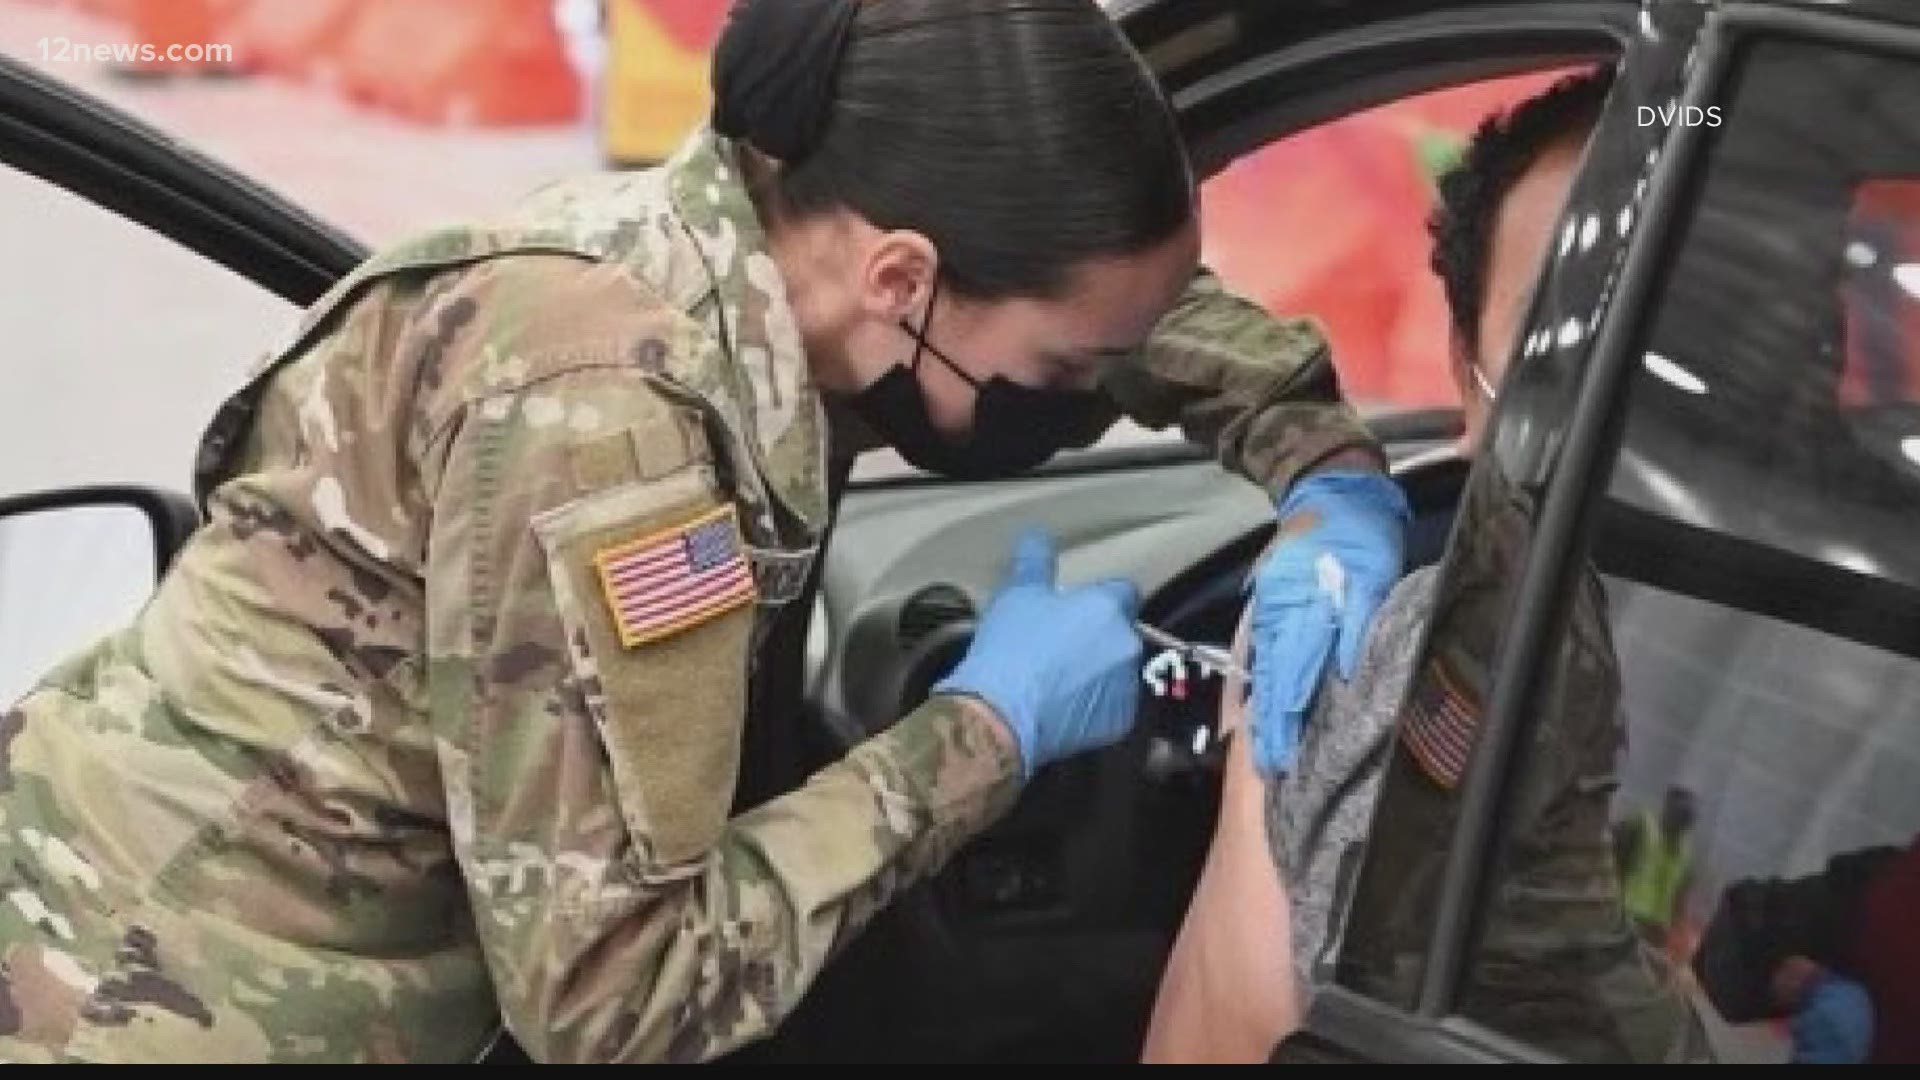 Specialist Andrea Michel is serving with the Arizona Army National Guard. Right out of high school, she helped serve her community by fighting the pandemic.